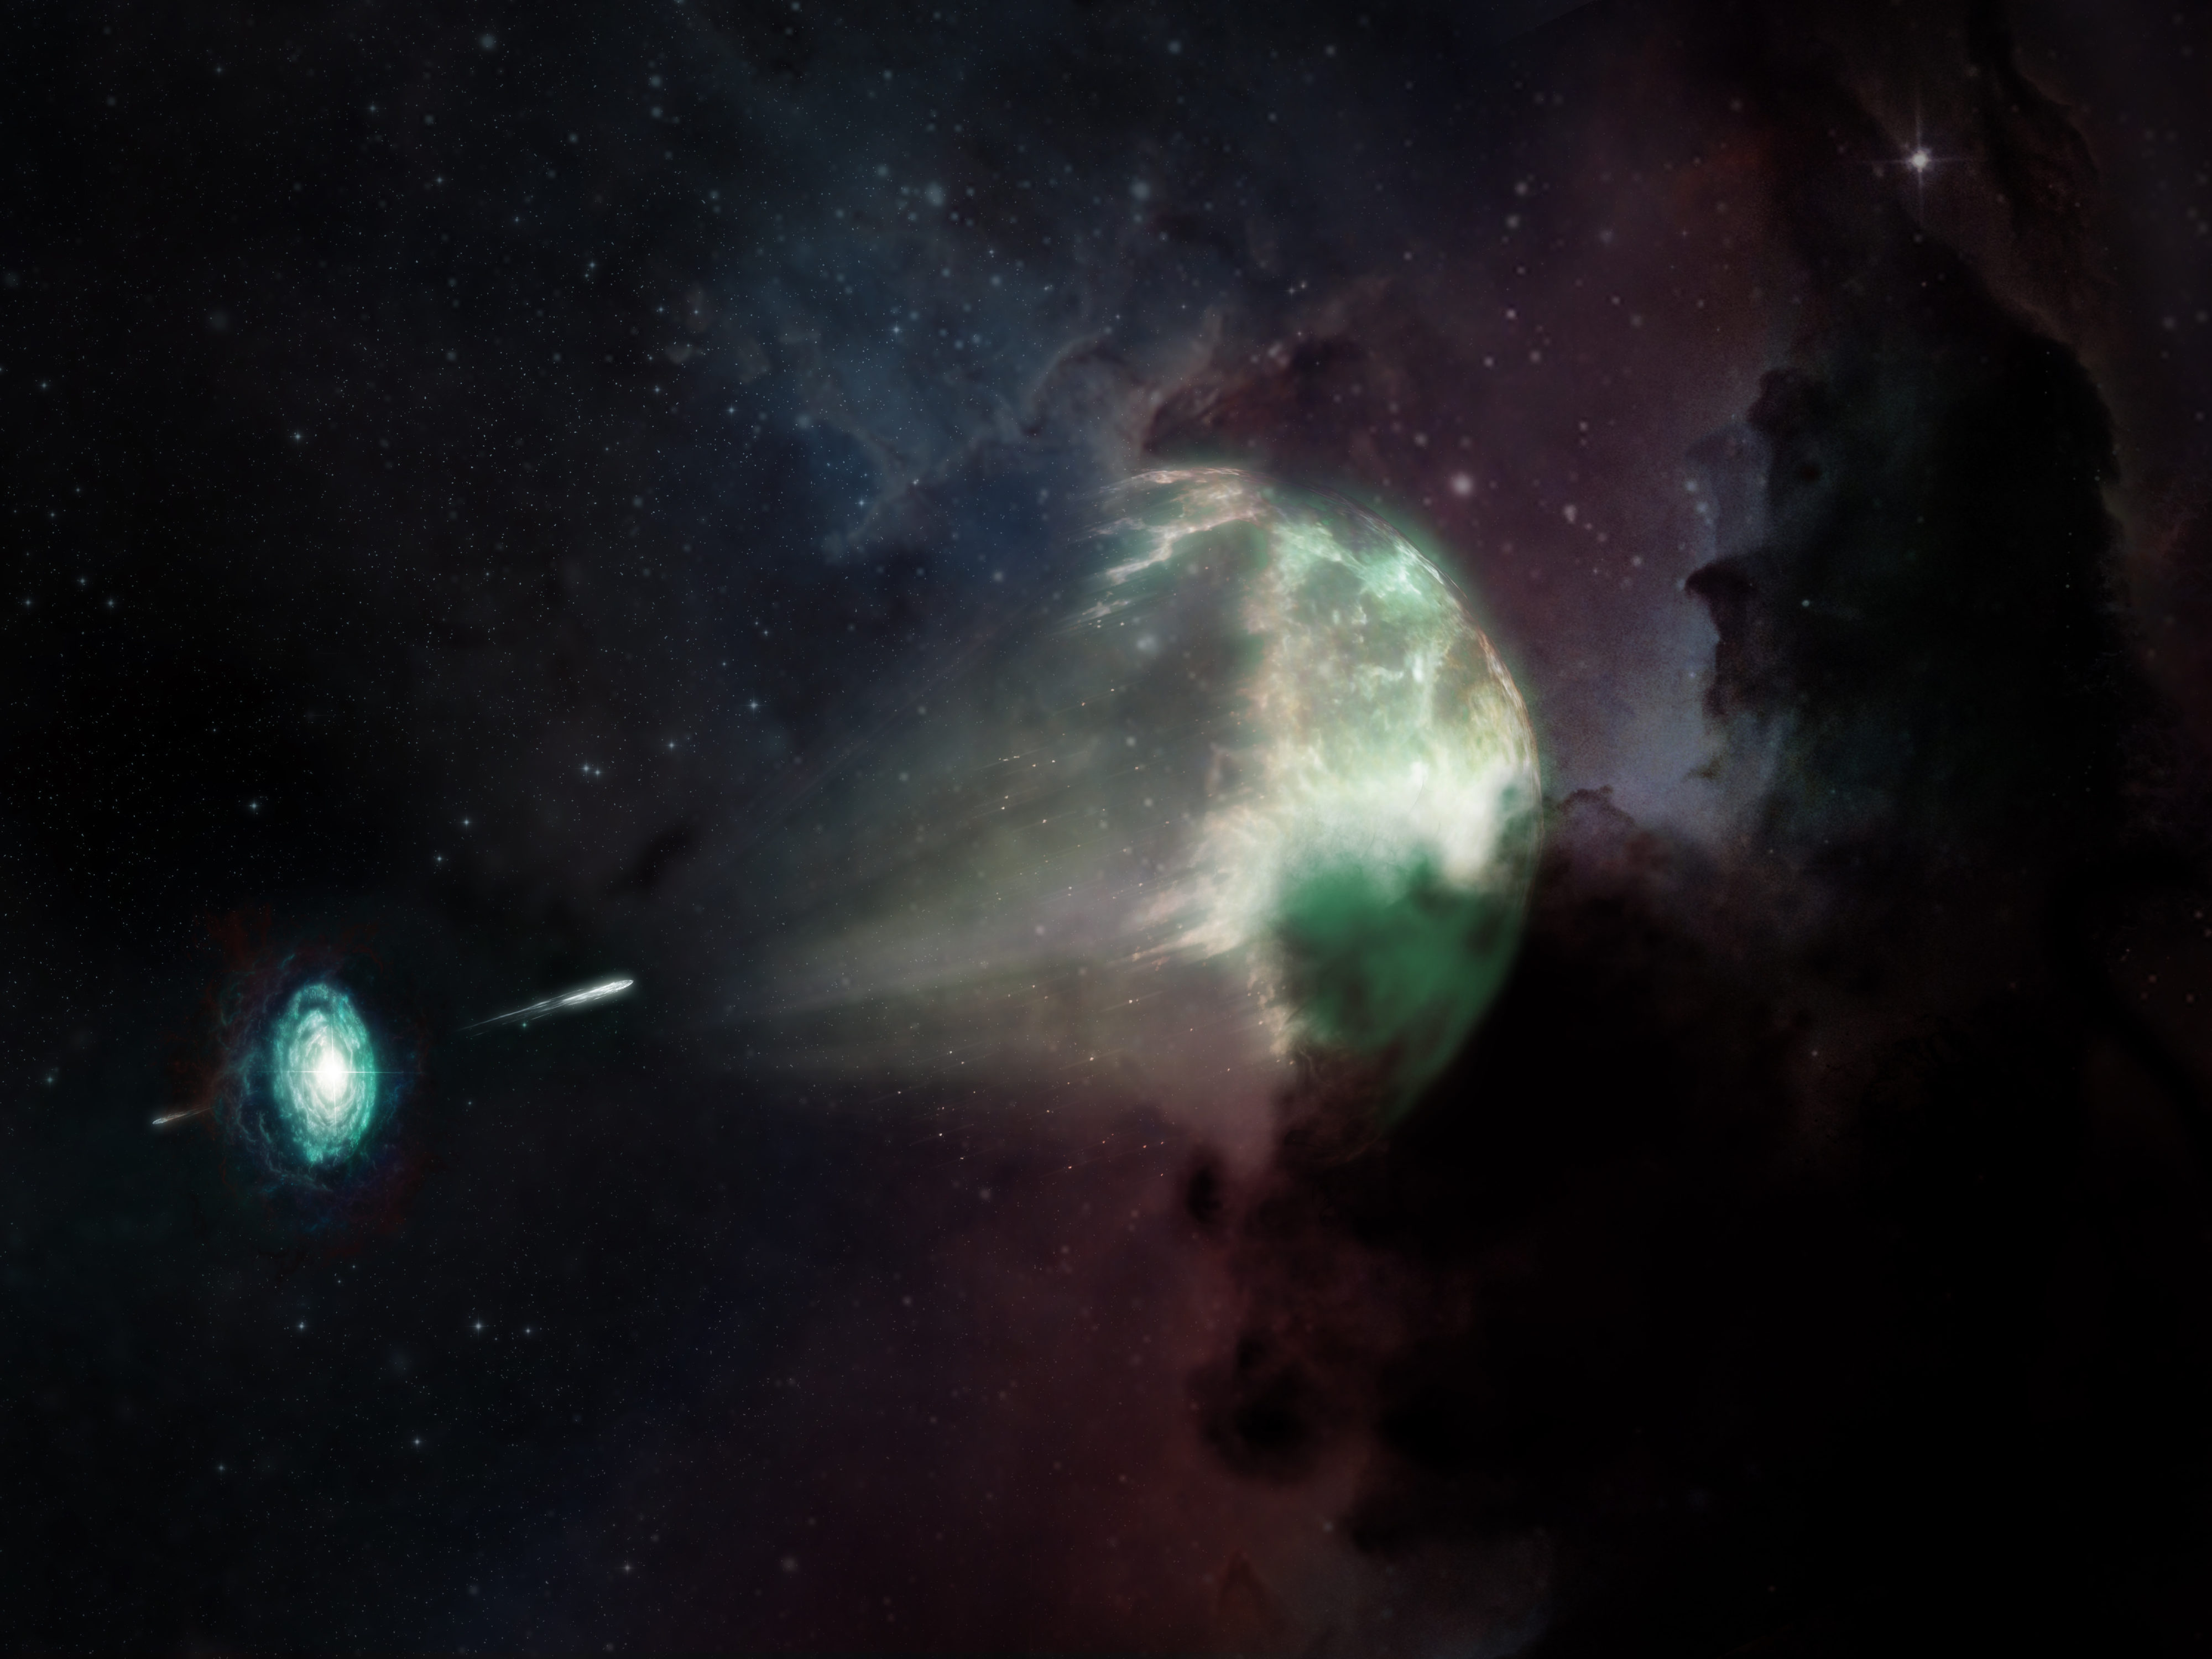 In a first for radio astronomy, scientists have detected millimeter-wavelength light from a short-duration gamma-ray burst. This artist's conception shows the merger between a neutron star and another star (seen as a disk, lower left) which caused an explosion resulting in the short-duration gamma-ray burst, GRB 211106A (white jet, middle), and left behind what scientists now know to be one of the most luminous afterglows on record (semi-spherical shock wave mid-right). While dust in the host galaxy obscured most of the visible light (shown as colors), millimeter light from the event (depicted in green) was able to escape and reach the Atacama Large Millimeter/submillimeter Array (ALMA), giving scientists an unprecedented view of this cosmic explosion. From the study, the team confirmed that GRB 211106A is one of the most energetic short-duration GRBs ever observed. Credit: ALMA (ESO/NAOJ/NRAO), M. Weiss (NRAO/AUI/NSF)